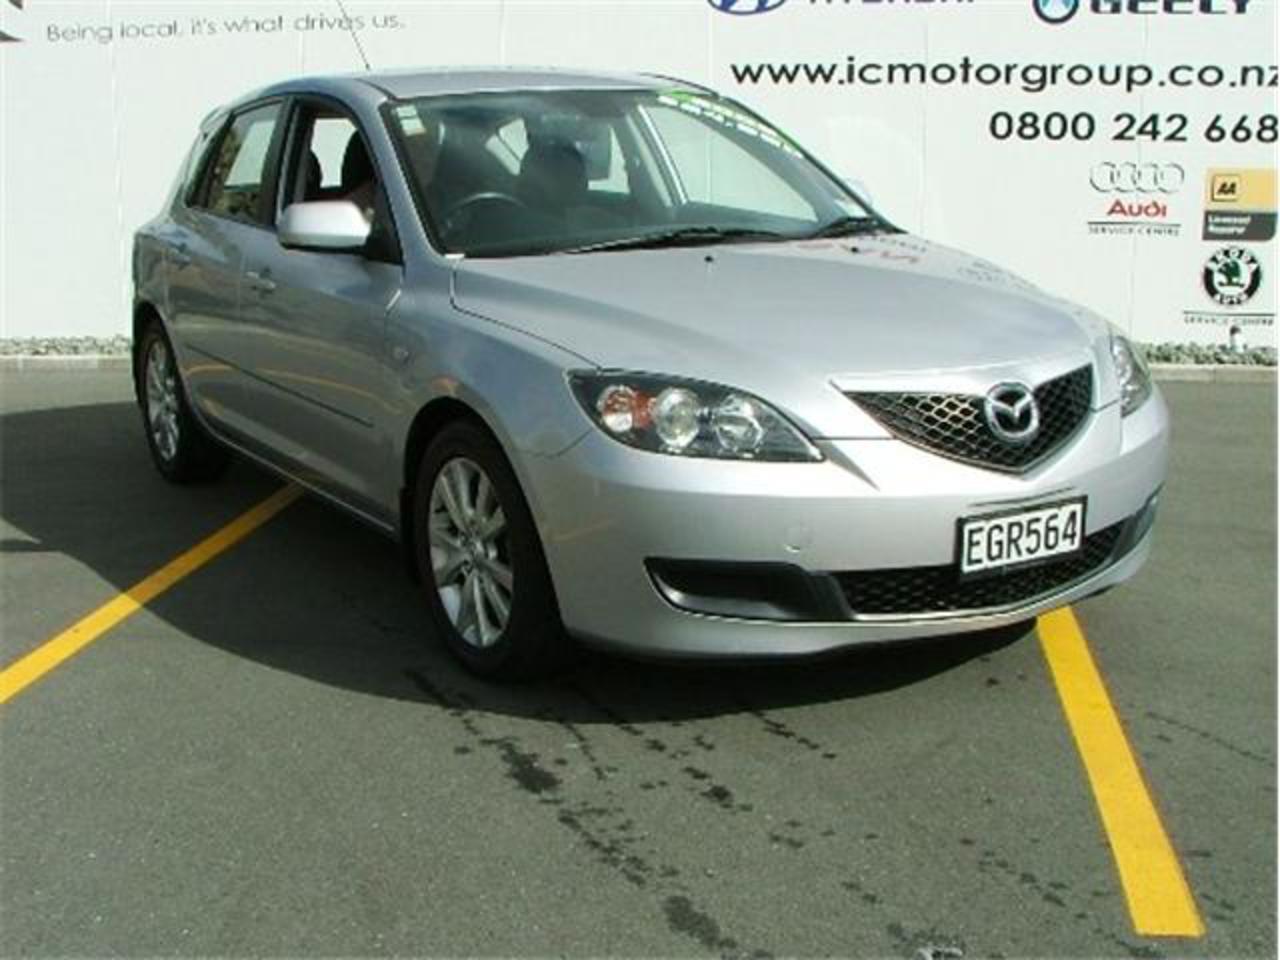 Mazda 3 GSX Sporthatch. View Download Wallpaper. 640x480. Comments